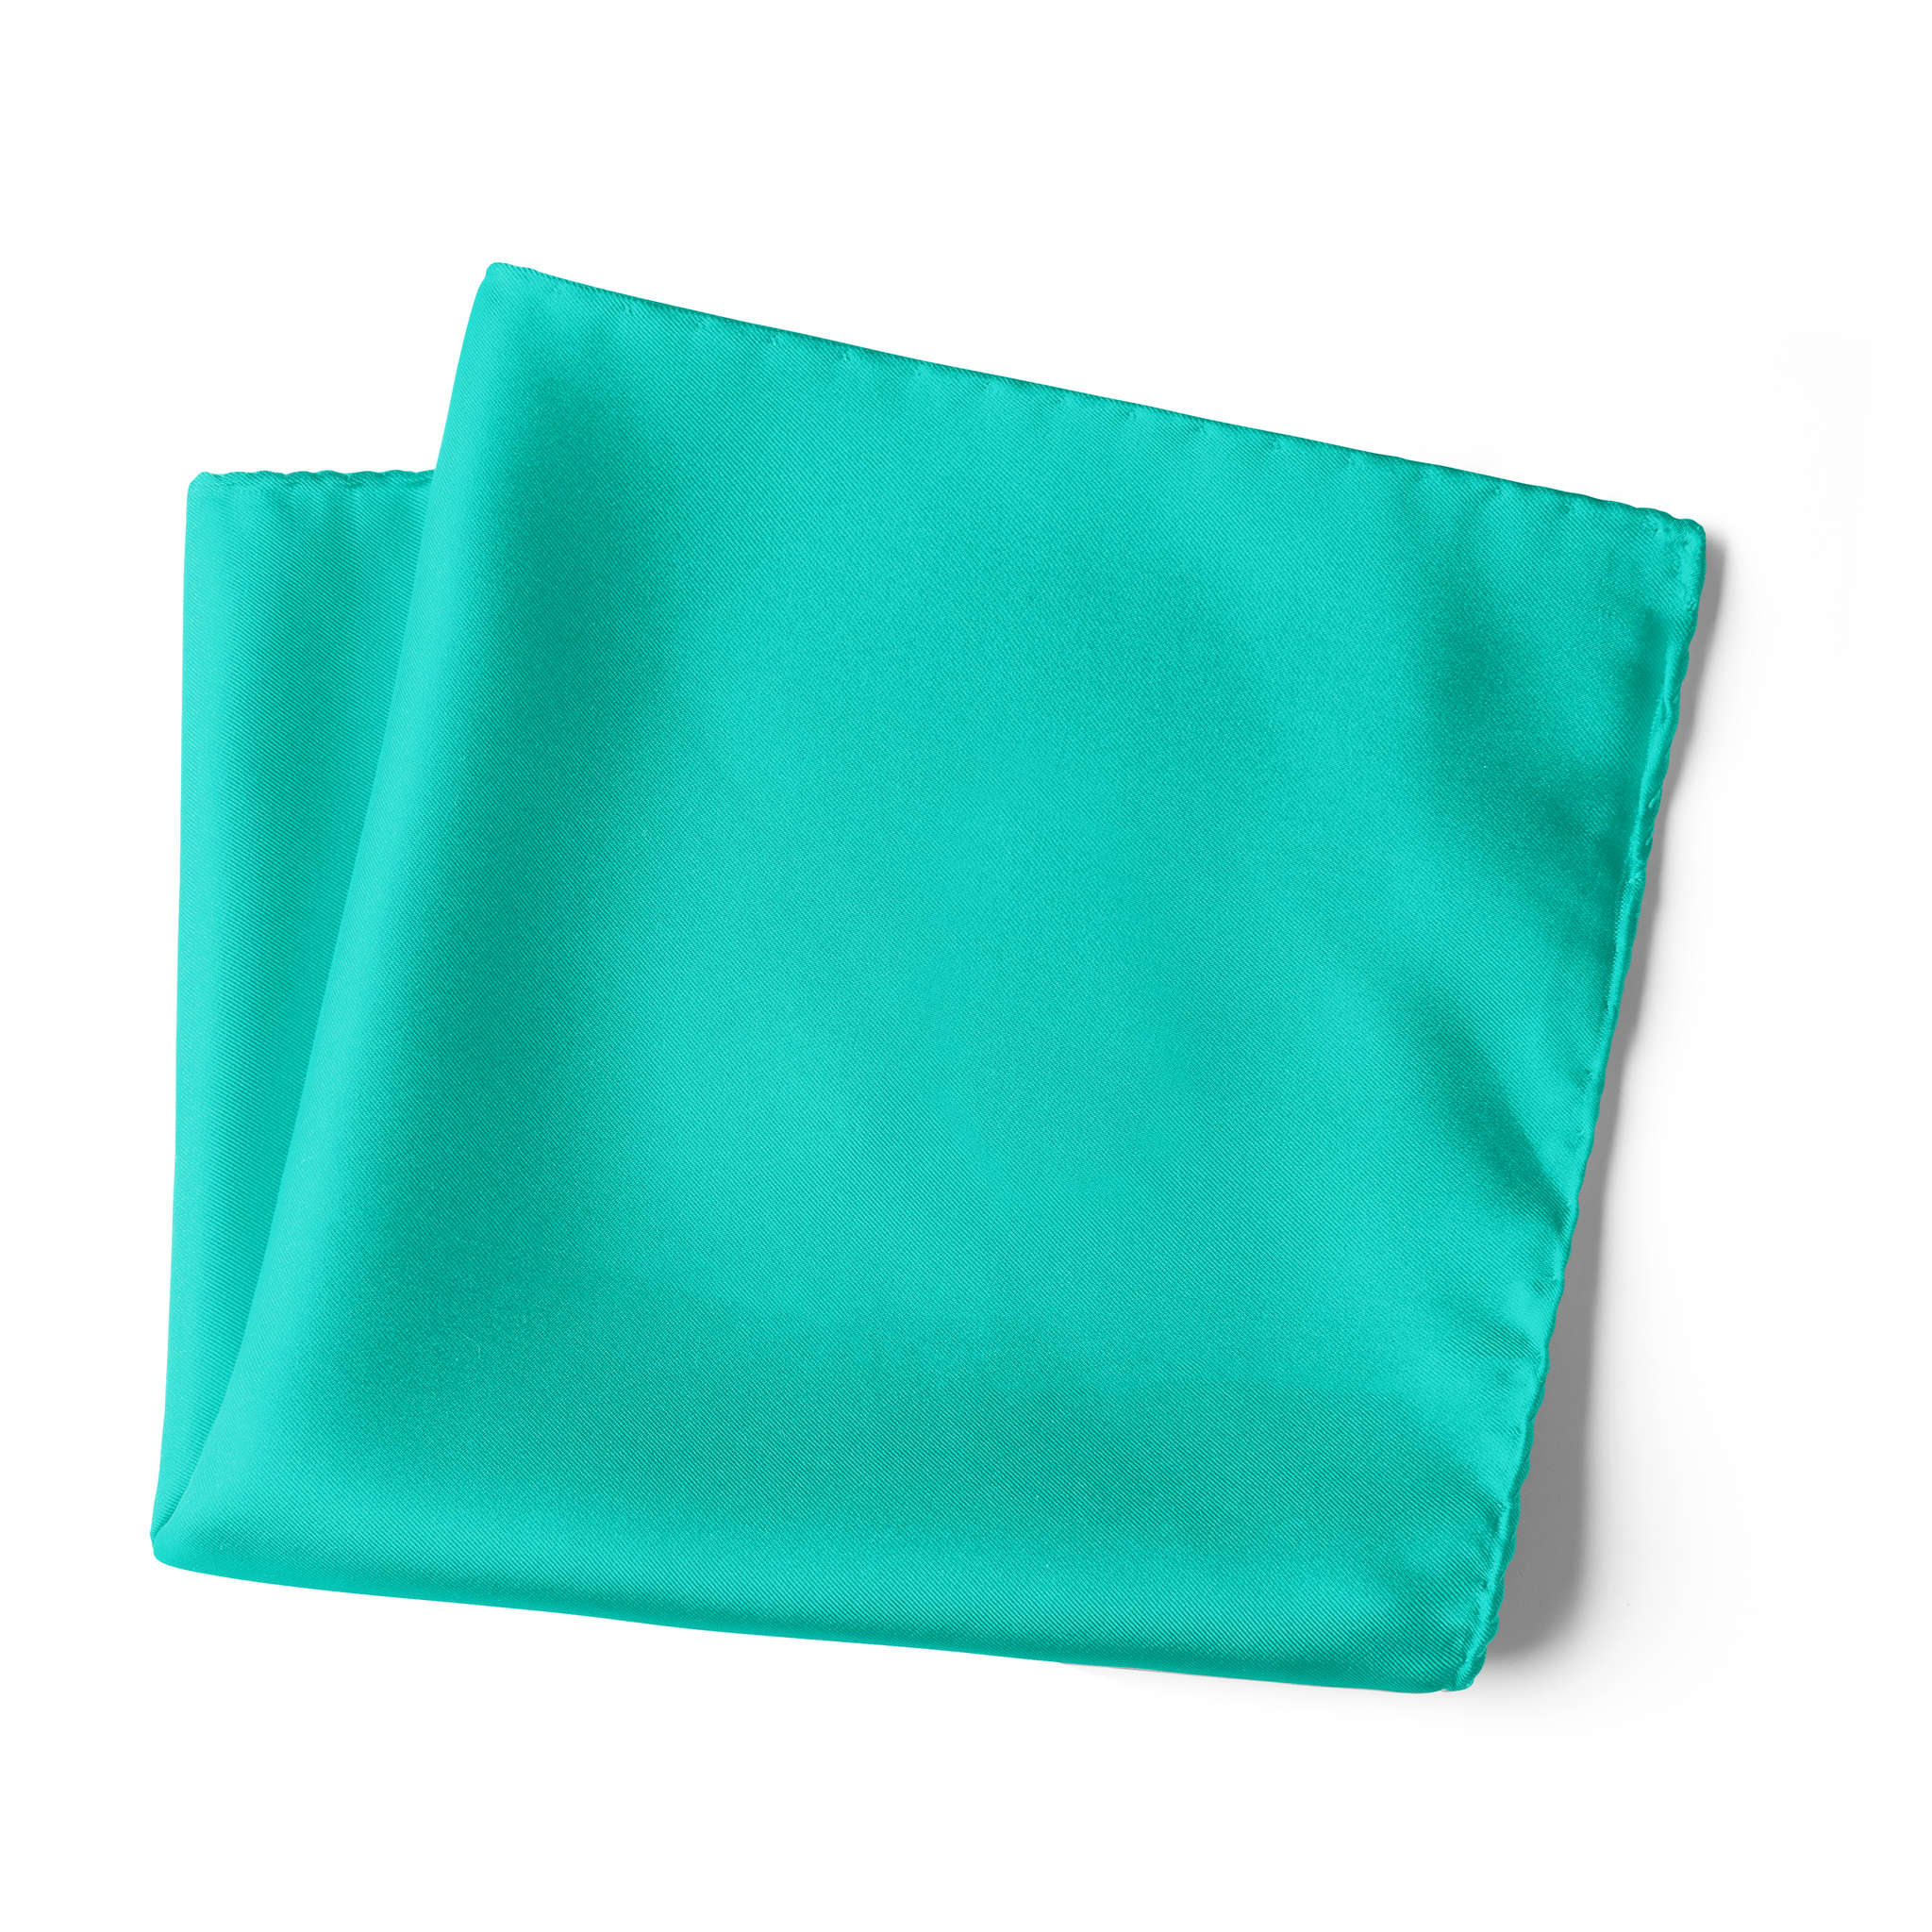 Chokore Turquoise Pure Silk Pocket Square, from the Solids Line